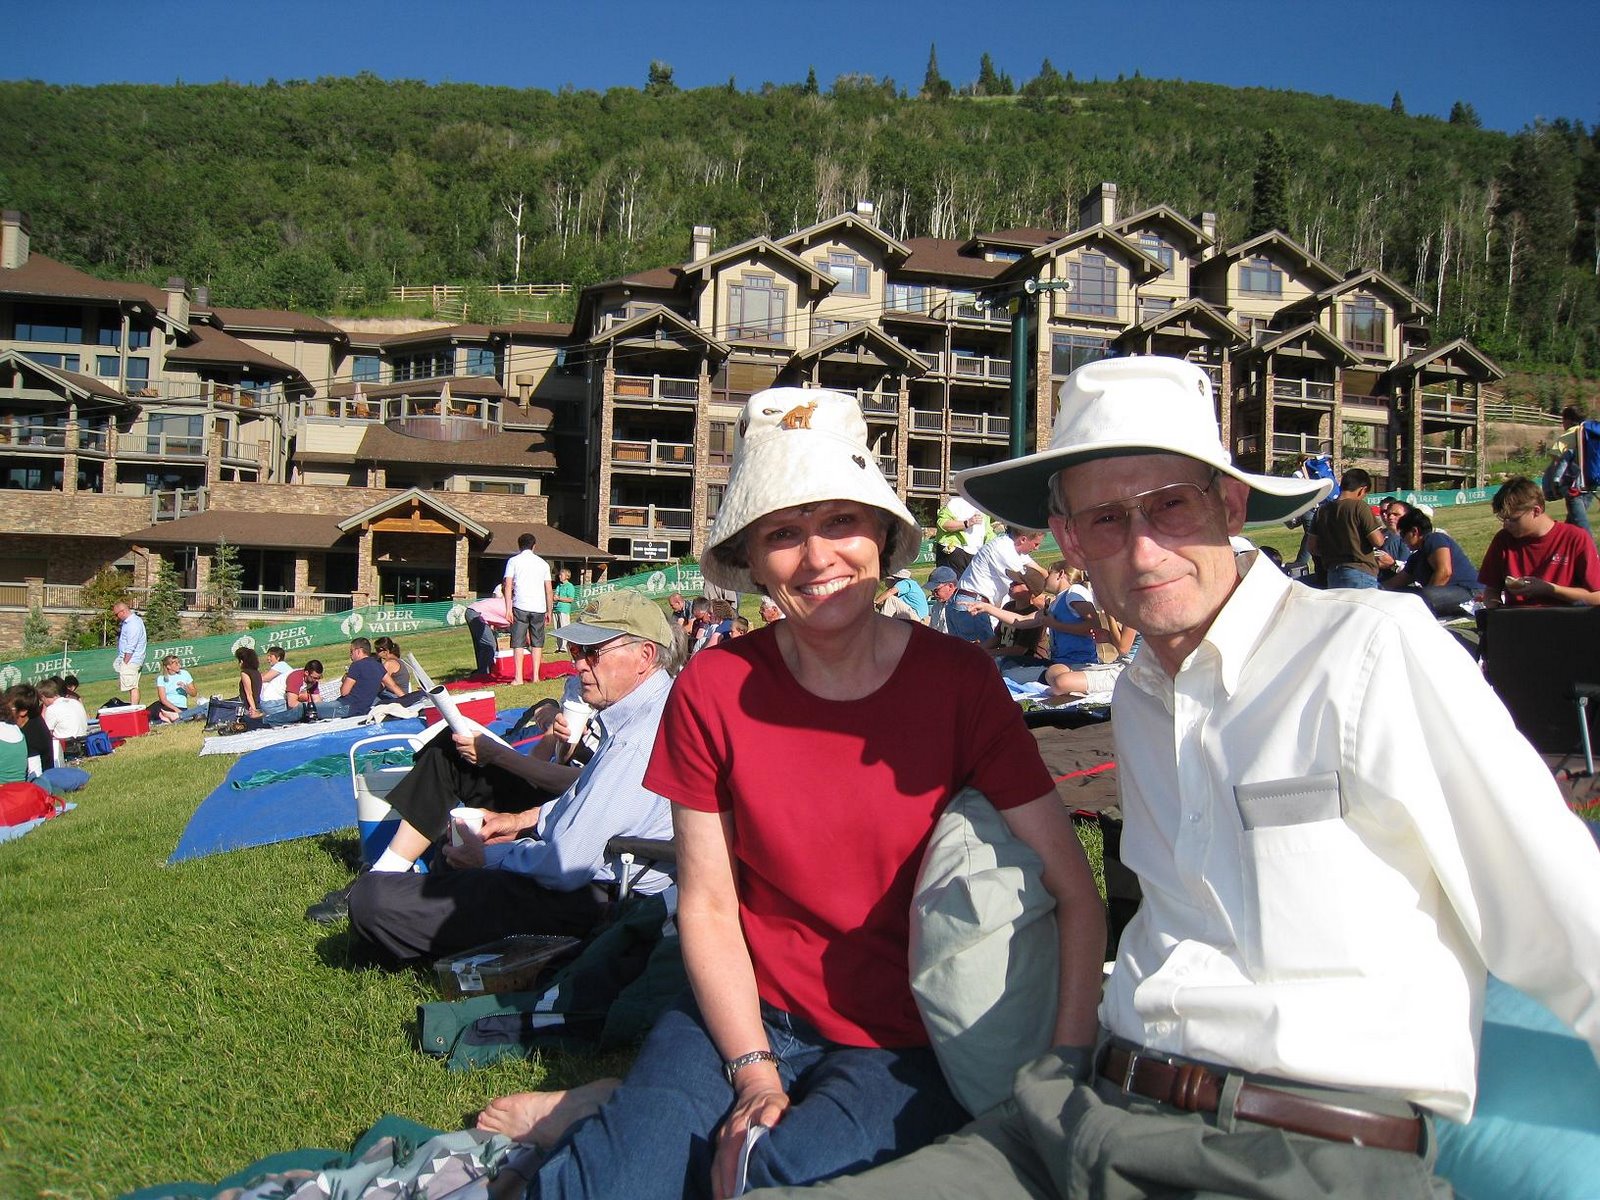 [Mom+and+Dad+at+Deer+Valley+Music+Festival.jpg]